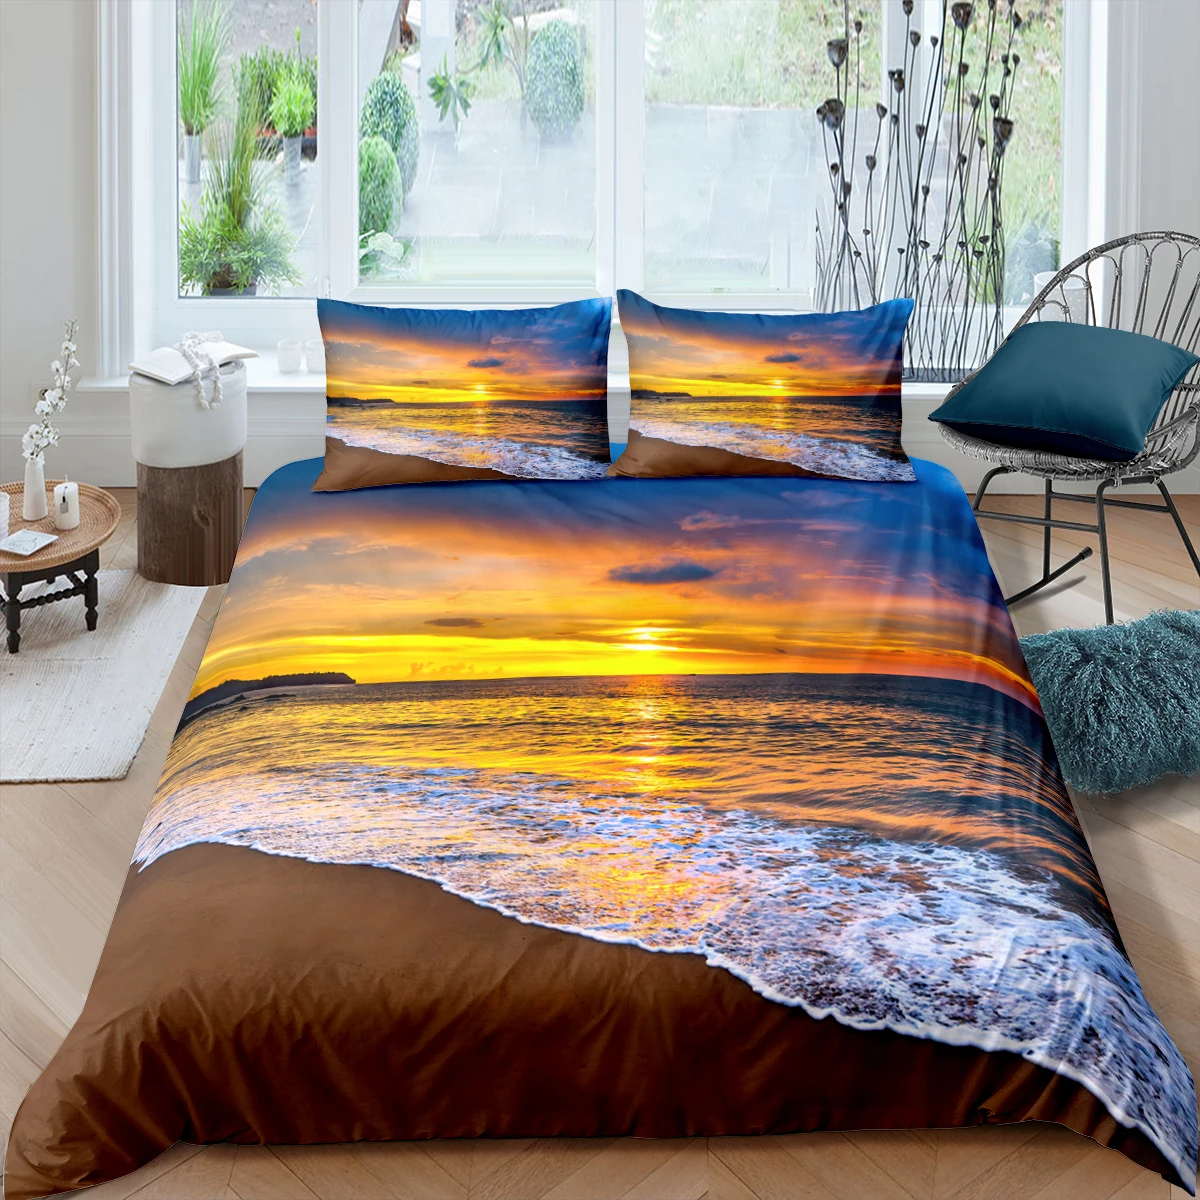 

Bedding Set for Kids Teen Adult Sea Coconut Tree Polyester Quilt Cover Ocean Beach King Queen Duvet Cover Seaside Sunset Scenery